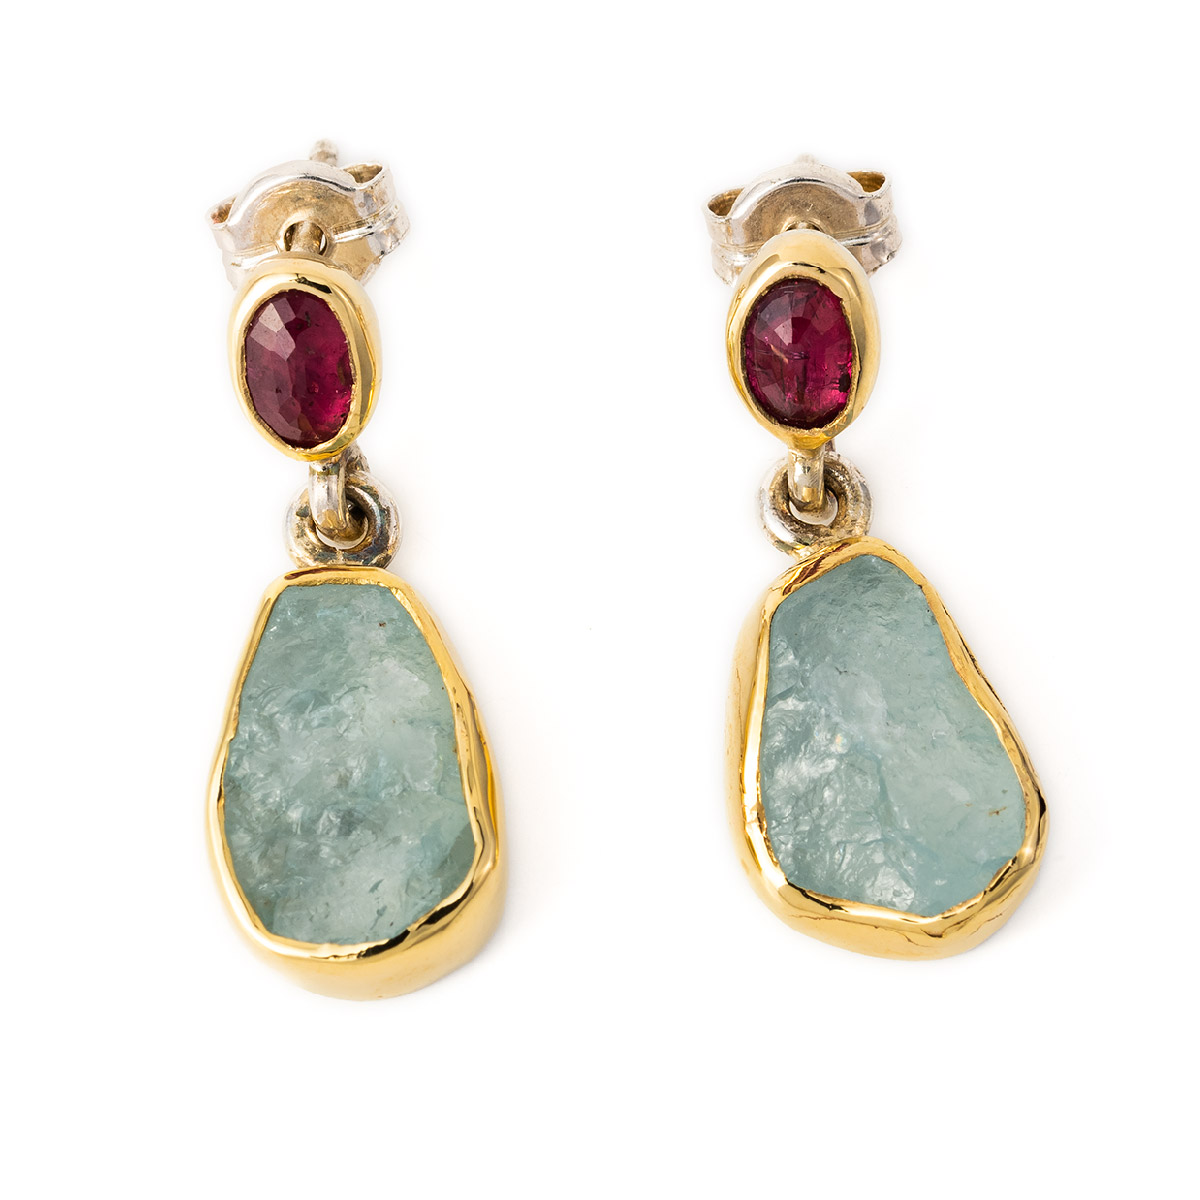 Aqua Marine Dangle Earrings with Ruby - 18K Gold and Sterling Silver